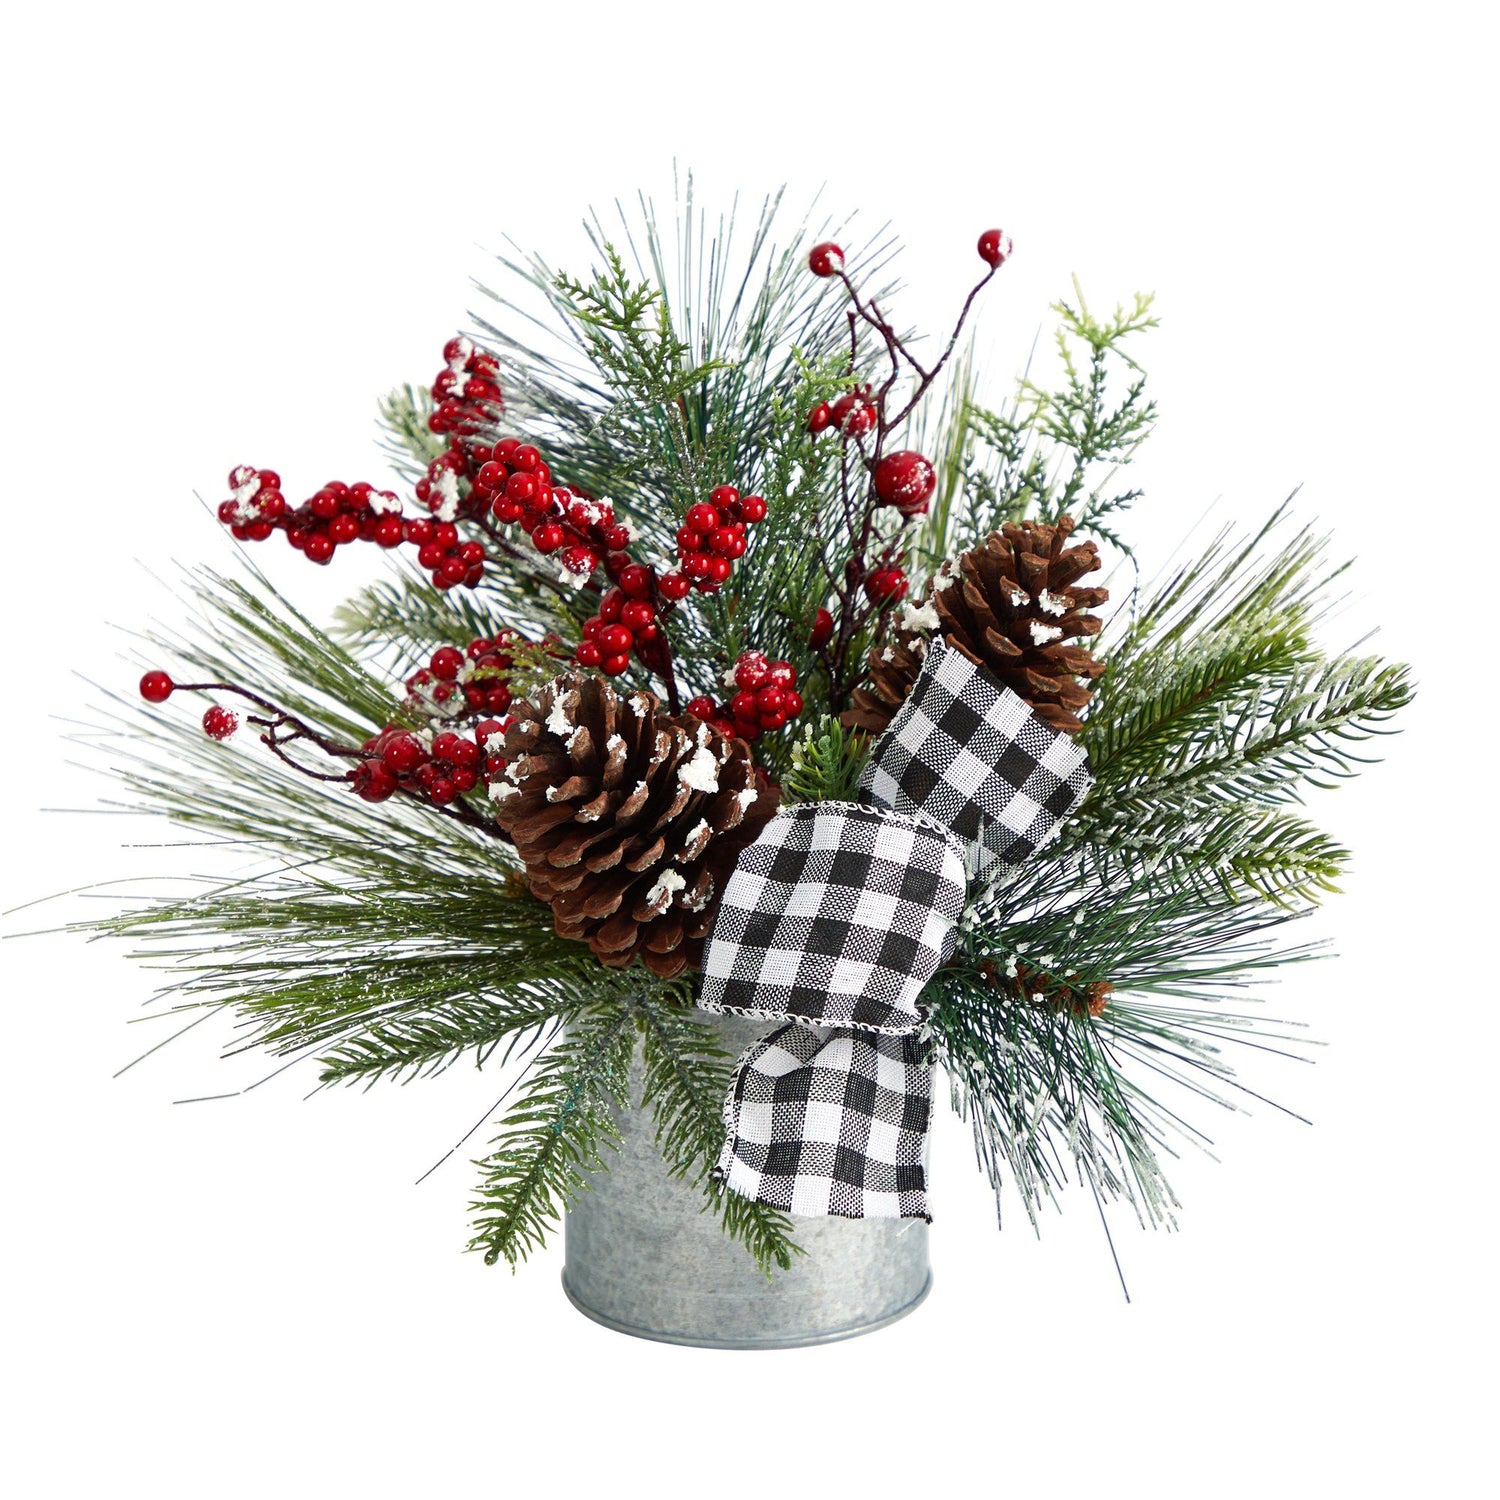 12” Frosted Pinecones and Berries Artificial Arrangement in Vase with Decorative Plaid Bow